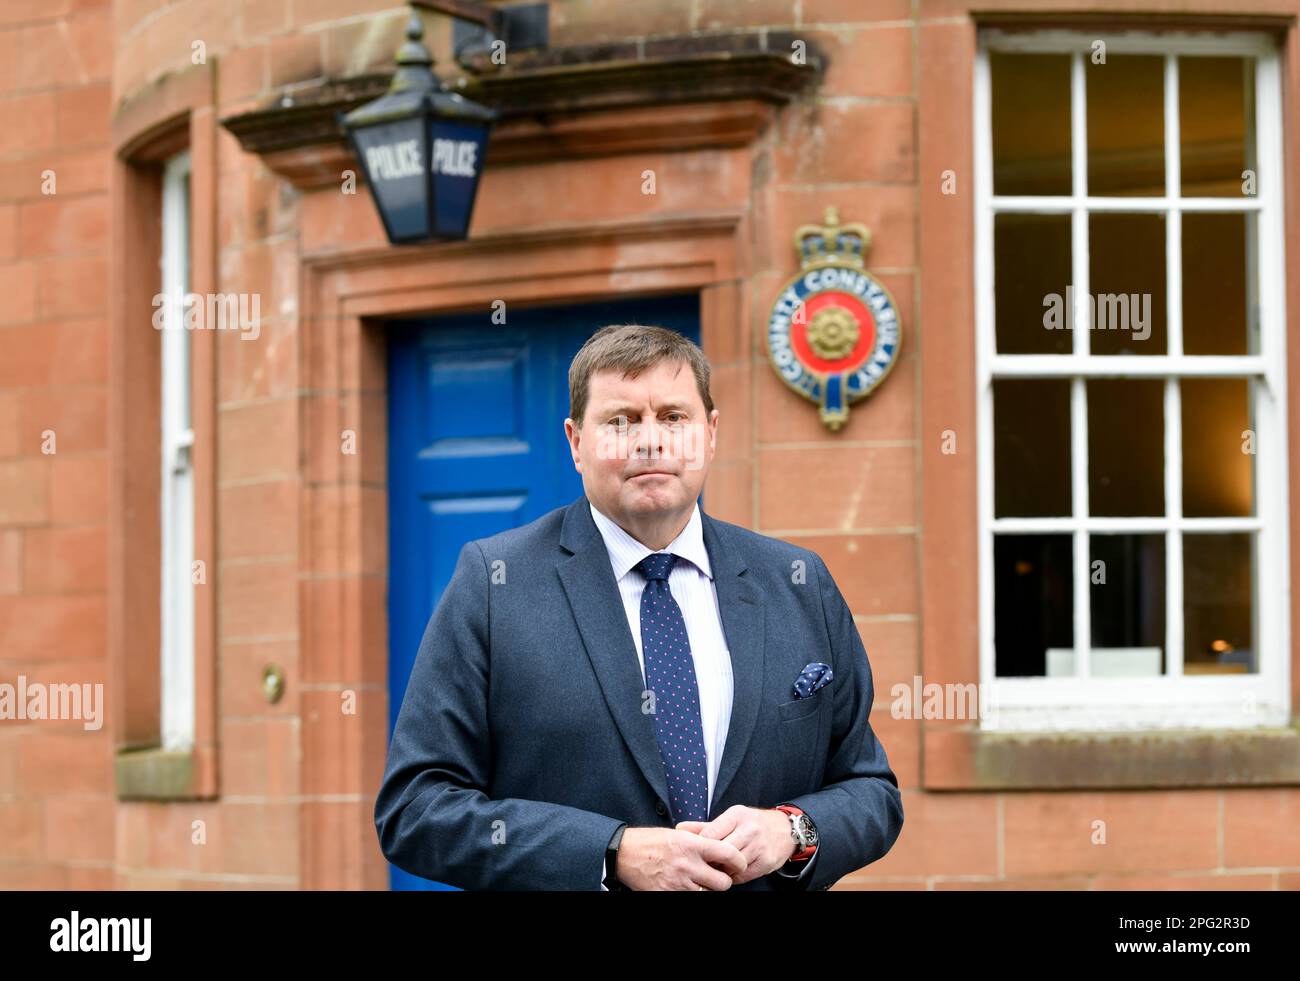 Cumbria Police and Crime Commissioner Peter McCall photographed outside Police Headquarters, Carelton hall, Penrith, Cumbria, England Stock Photo